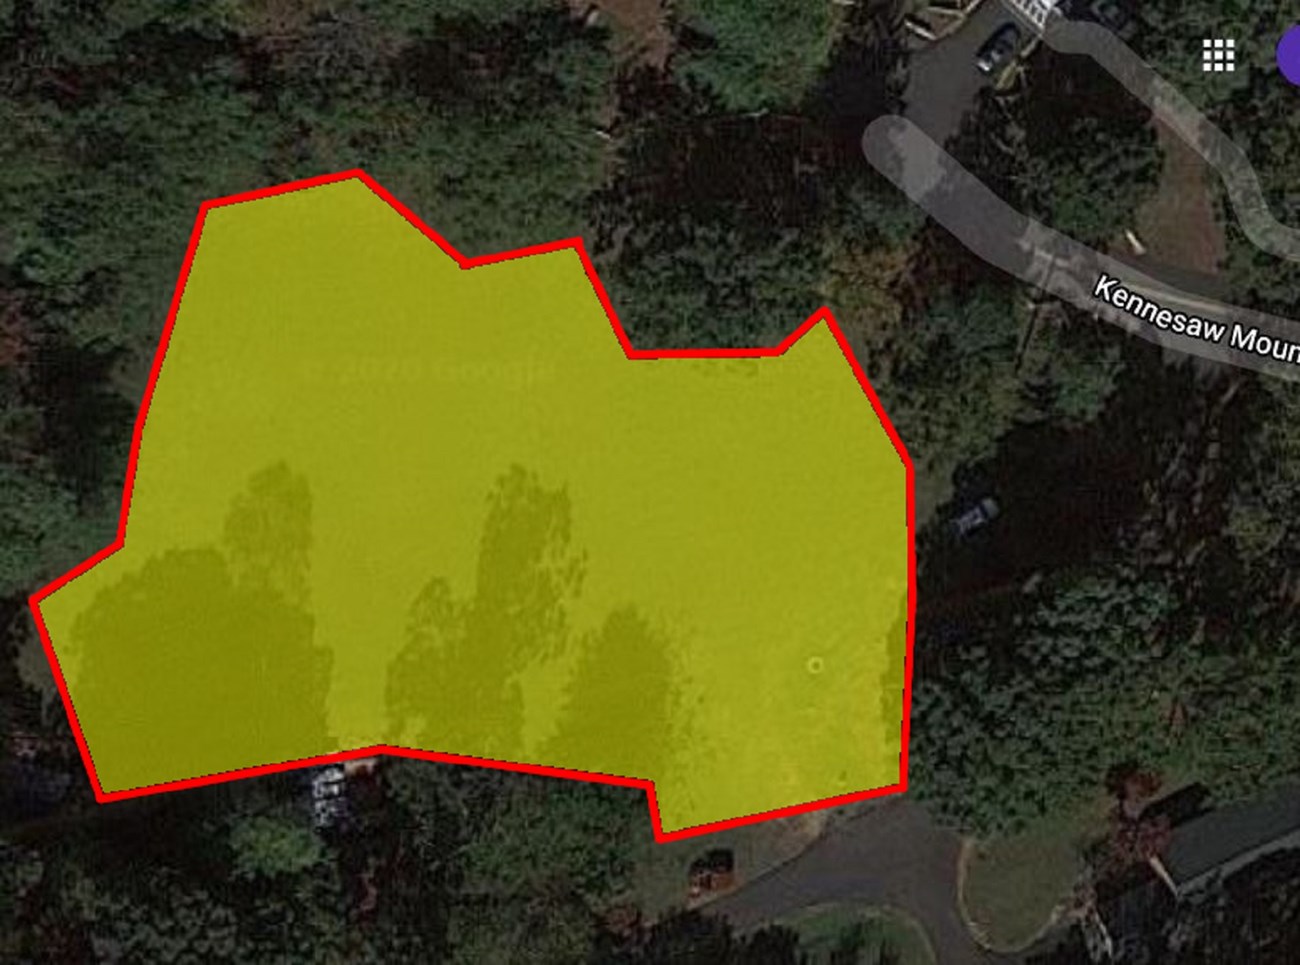 Yellow highlights jagged field area surrounded by trees. Right side of field has narrow asphalt path ways and top right section shows the end of Kennesaw Mountain Rd.